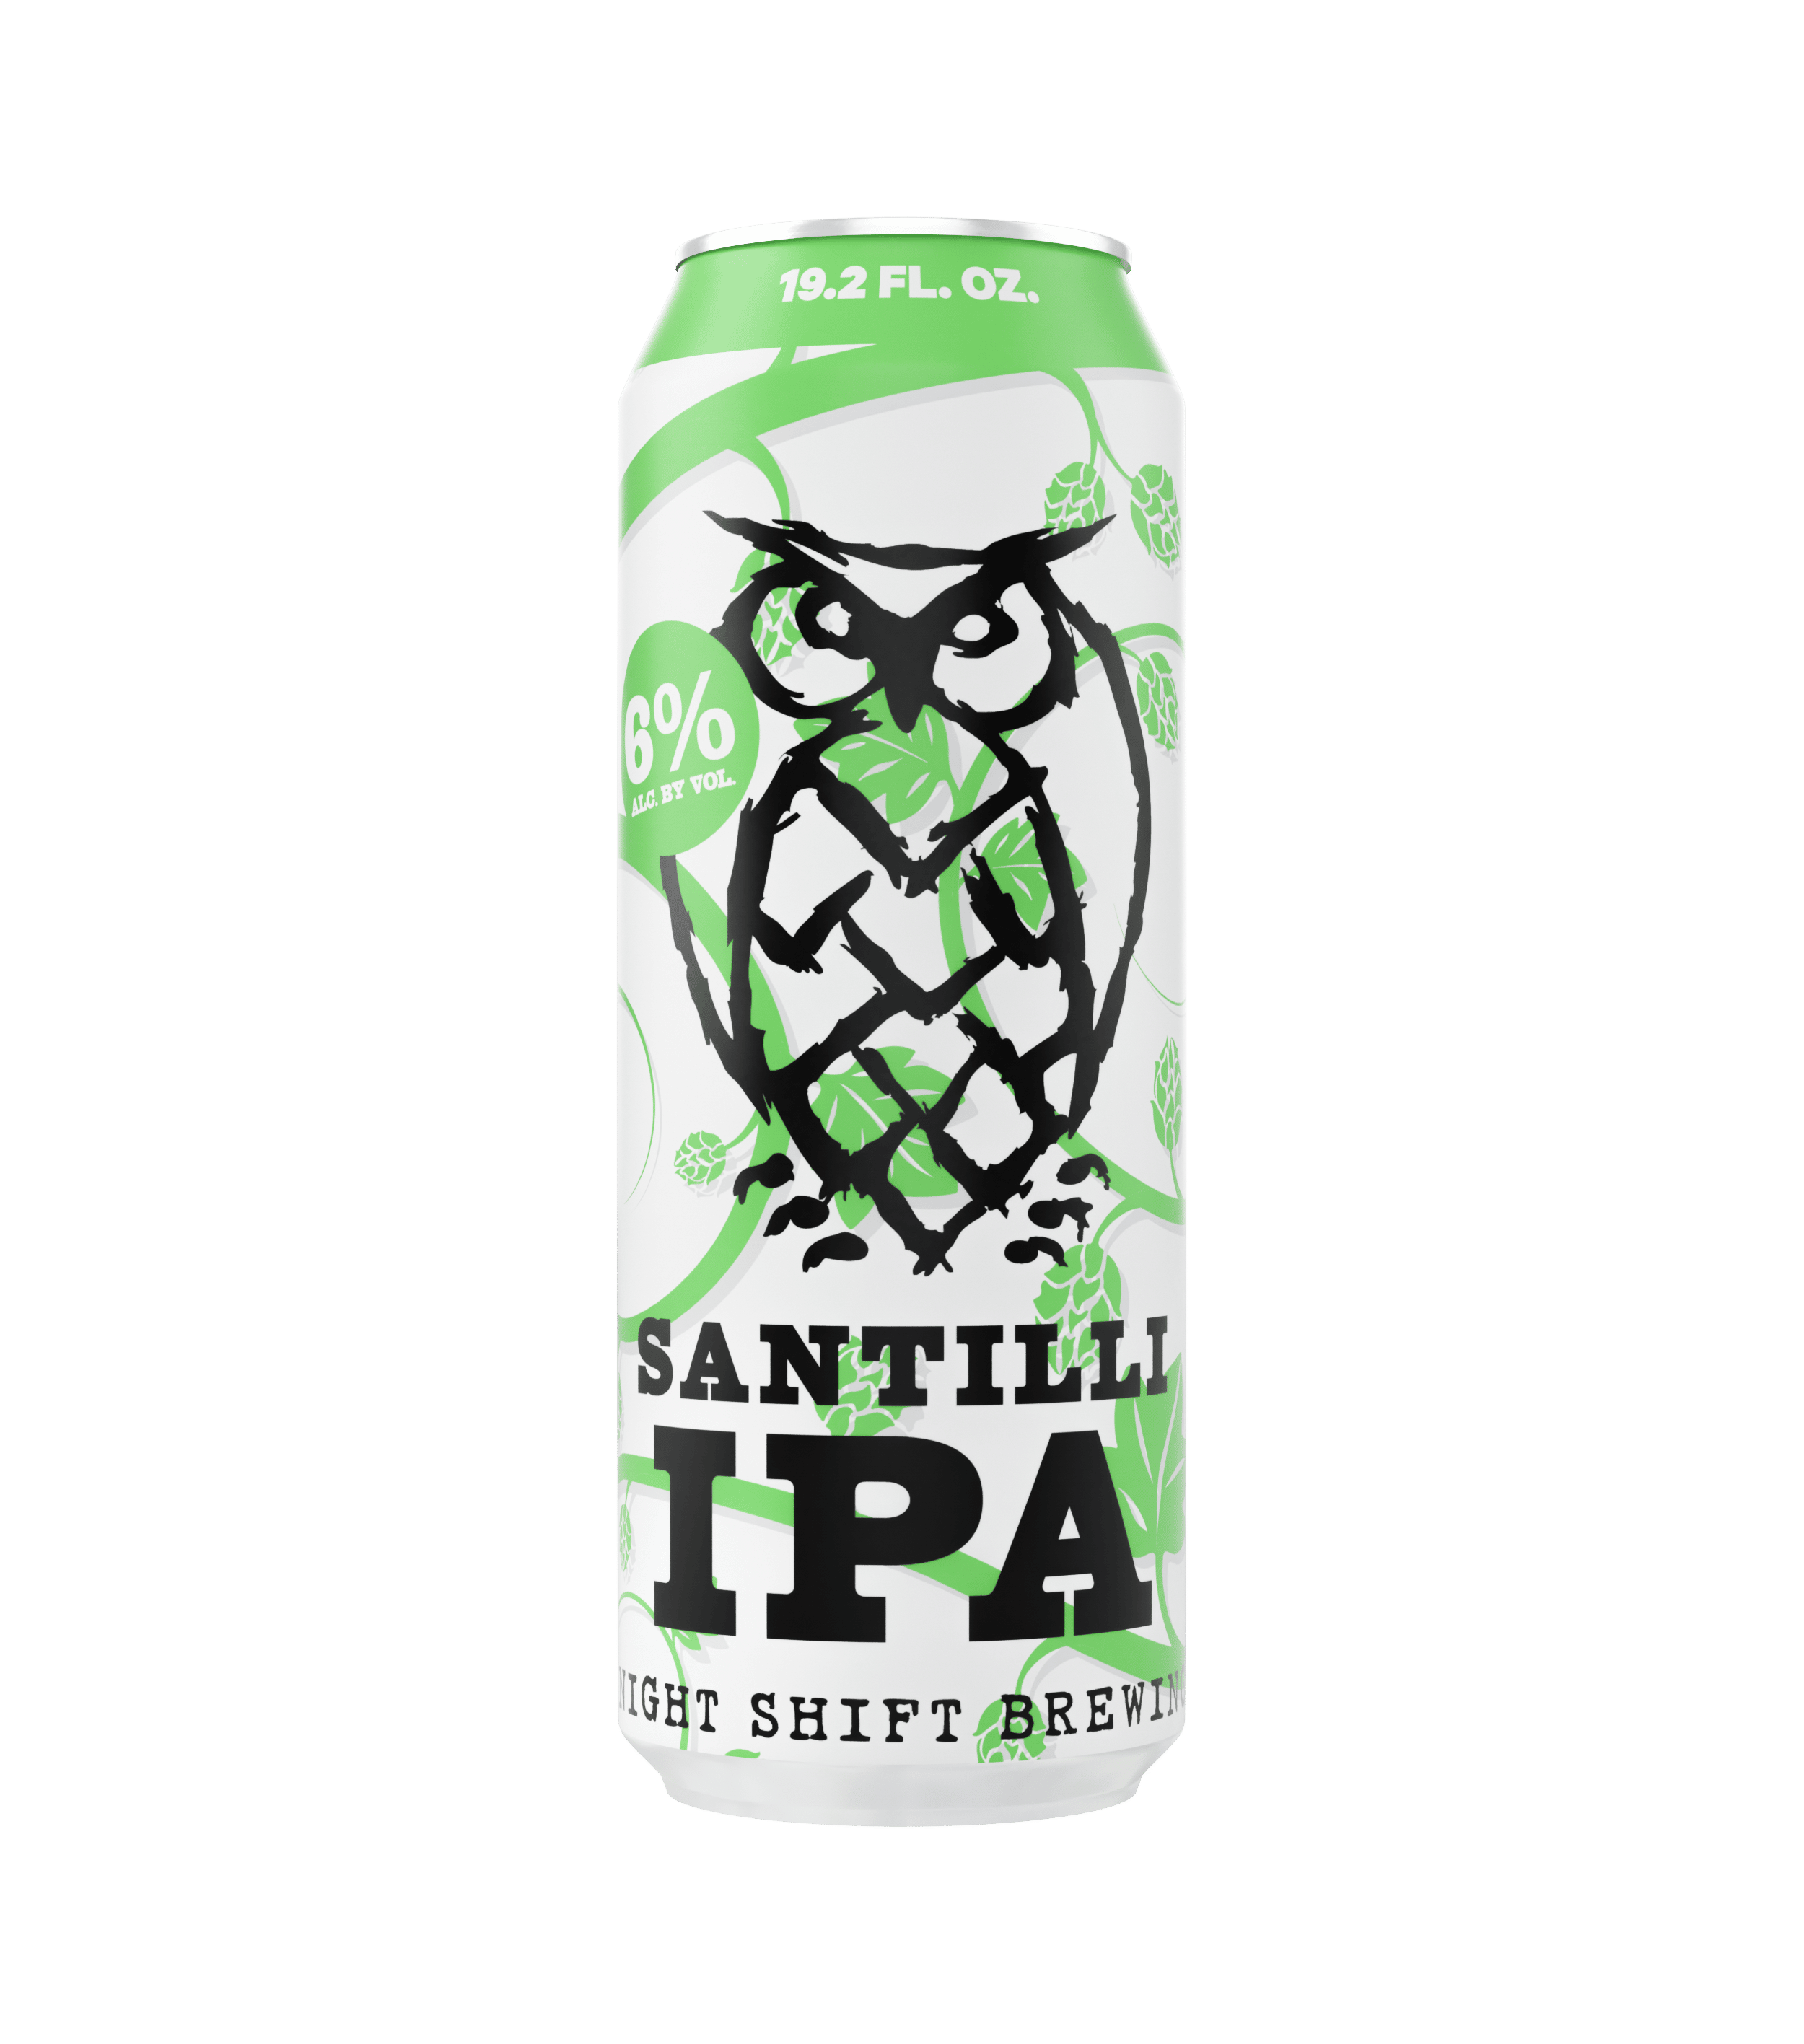 Our NEW Hop Owl Party Packs are the ultimate wingman for hoppy beer lovers!  🕺🍻 With a killer lineup that features Whirlpool, Santilli IPA, …